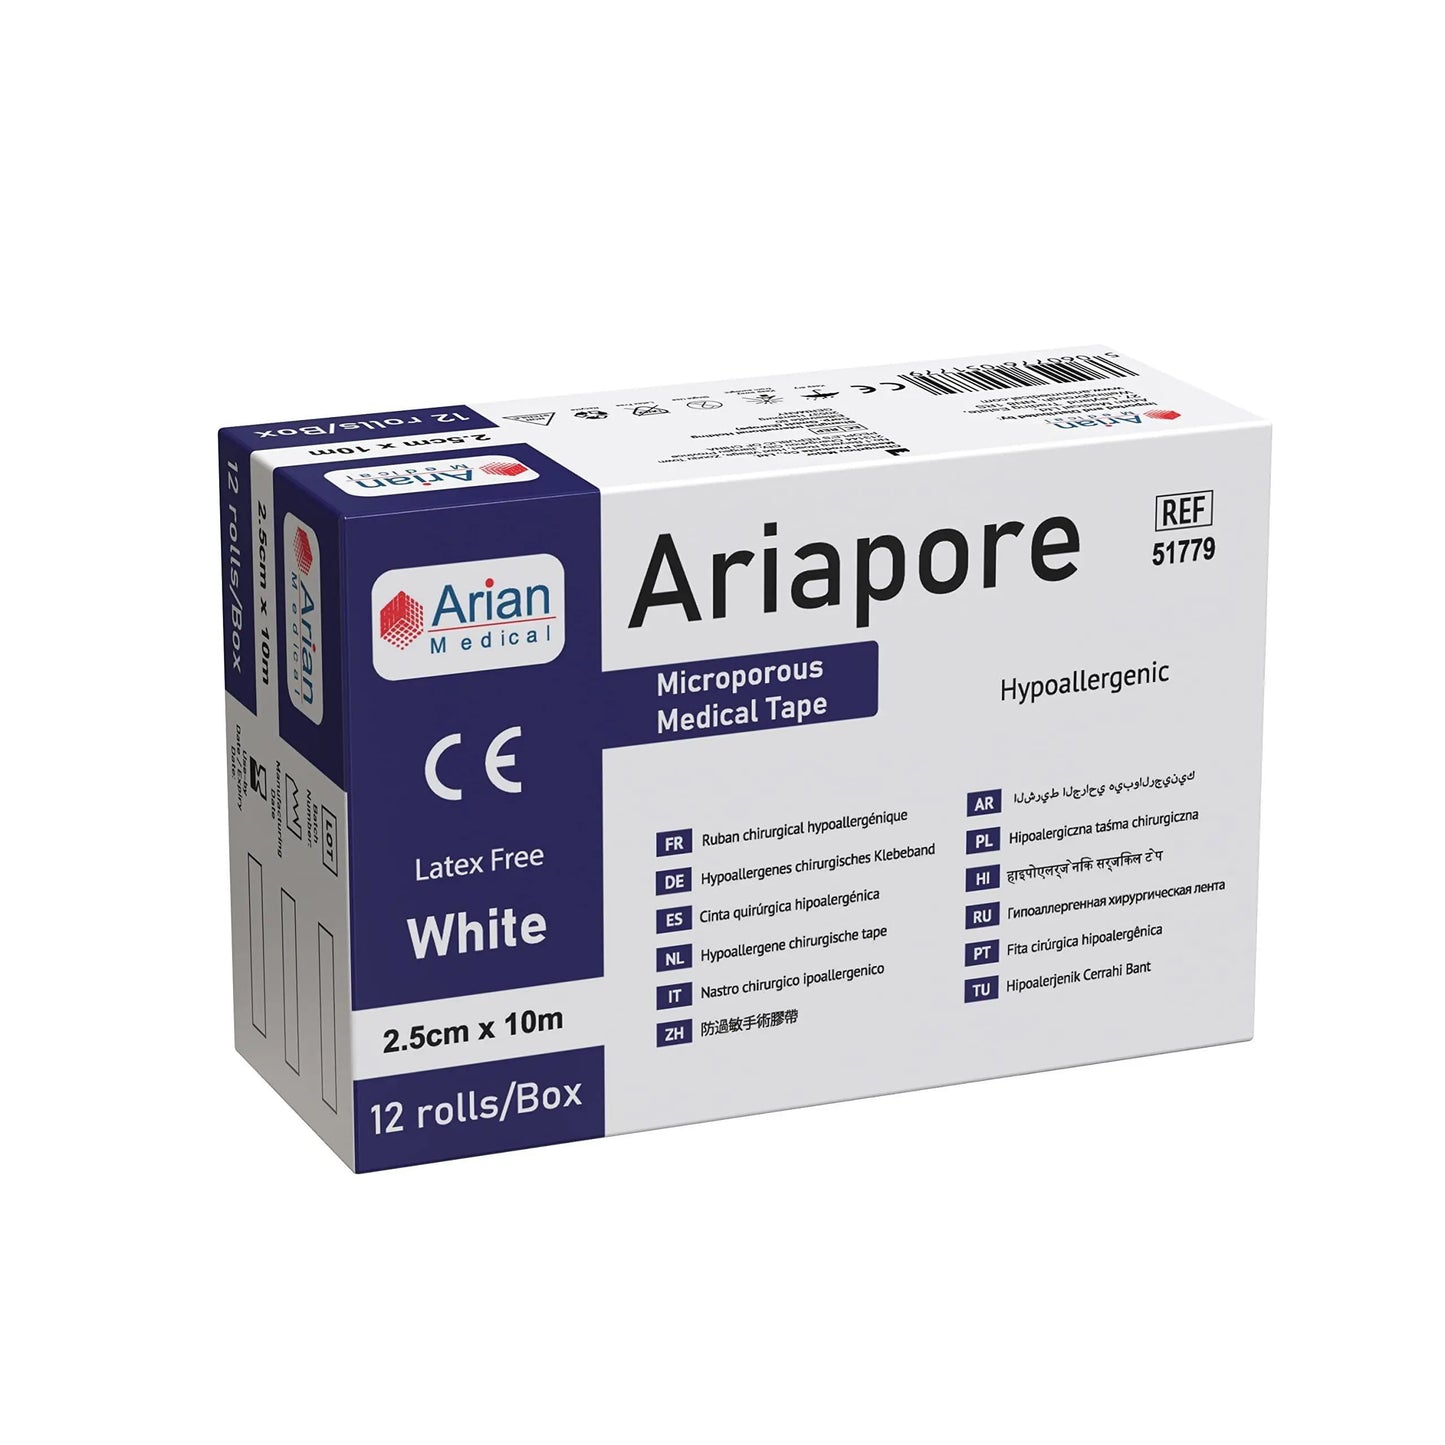 Ariapore Micropore Surgical Tape 2.5cm X 10m - 6 Rolls